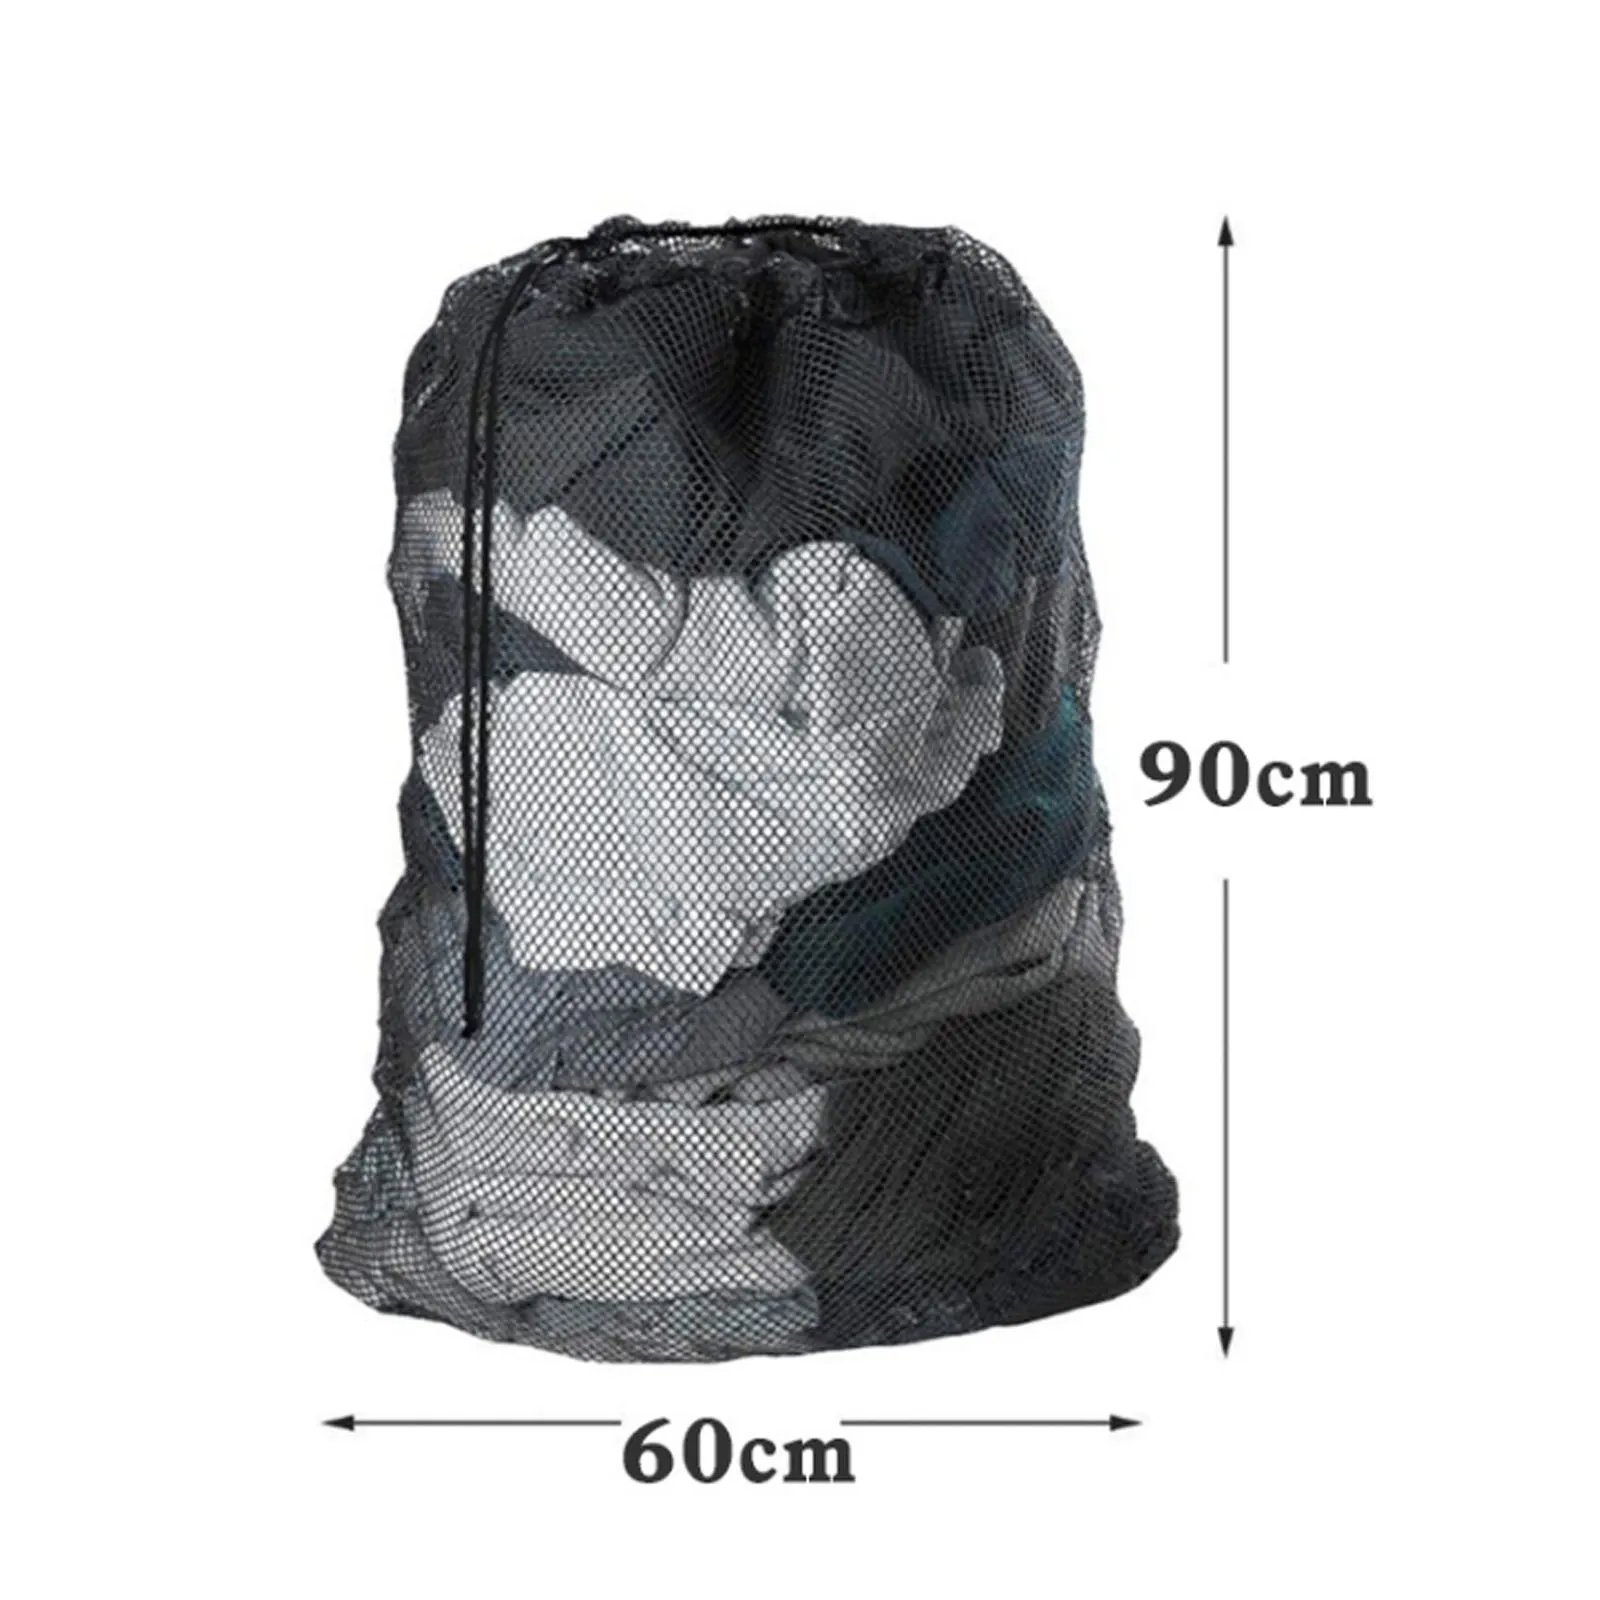 Large Size Laundry Mesh Bag Solid Color Drawstring Laundry Bag Anti-snagging Anti-deformation Mesh Clothes Washing Bag 60x90cm images - 6